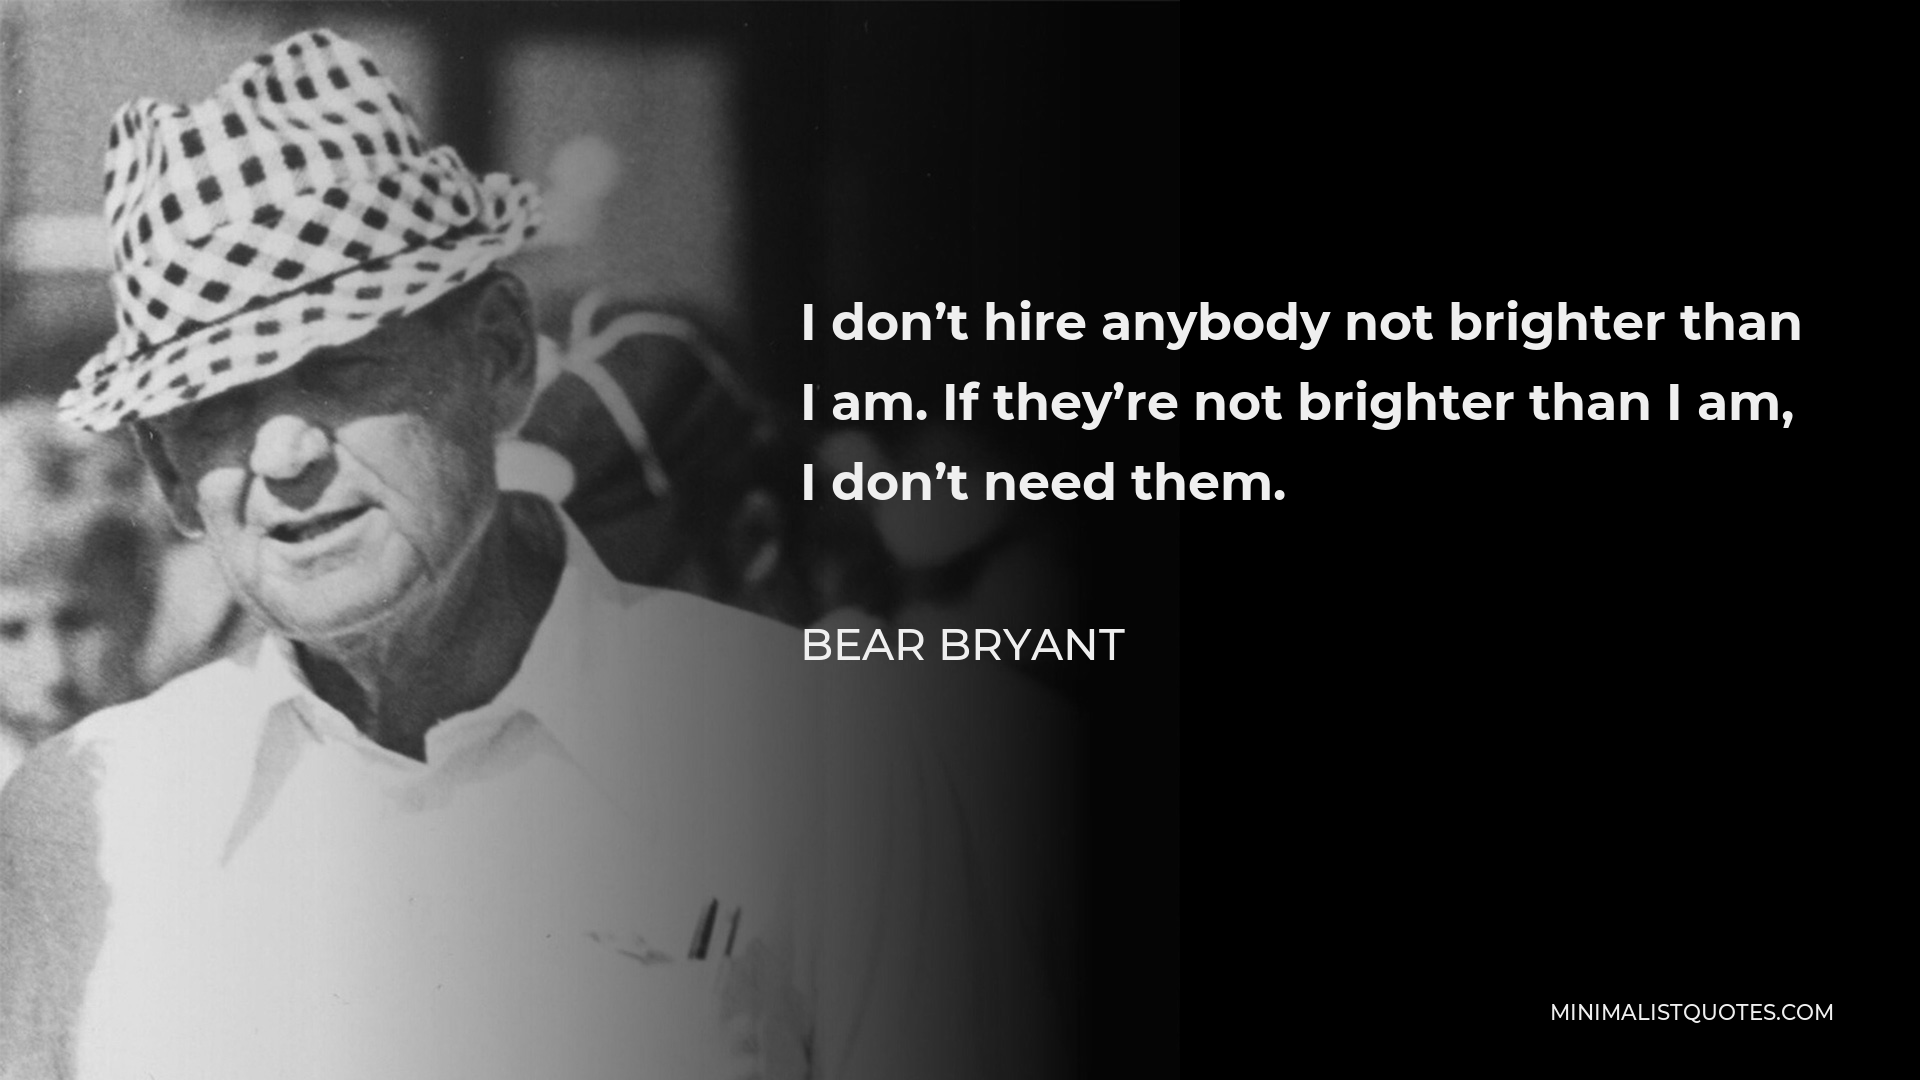 Bear Bryant Quote - I don’t hire anybody not brighter than I am. If they’re not brighter than I am, I don’t need them.